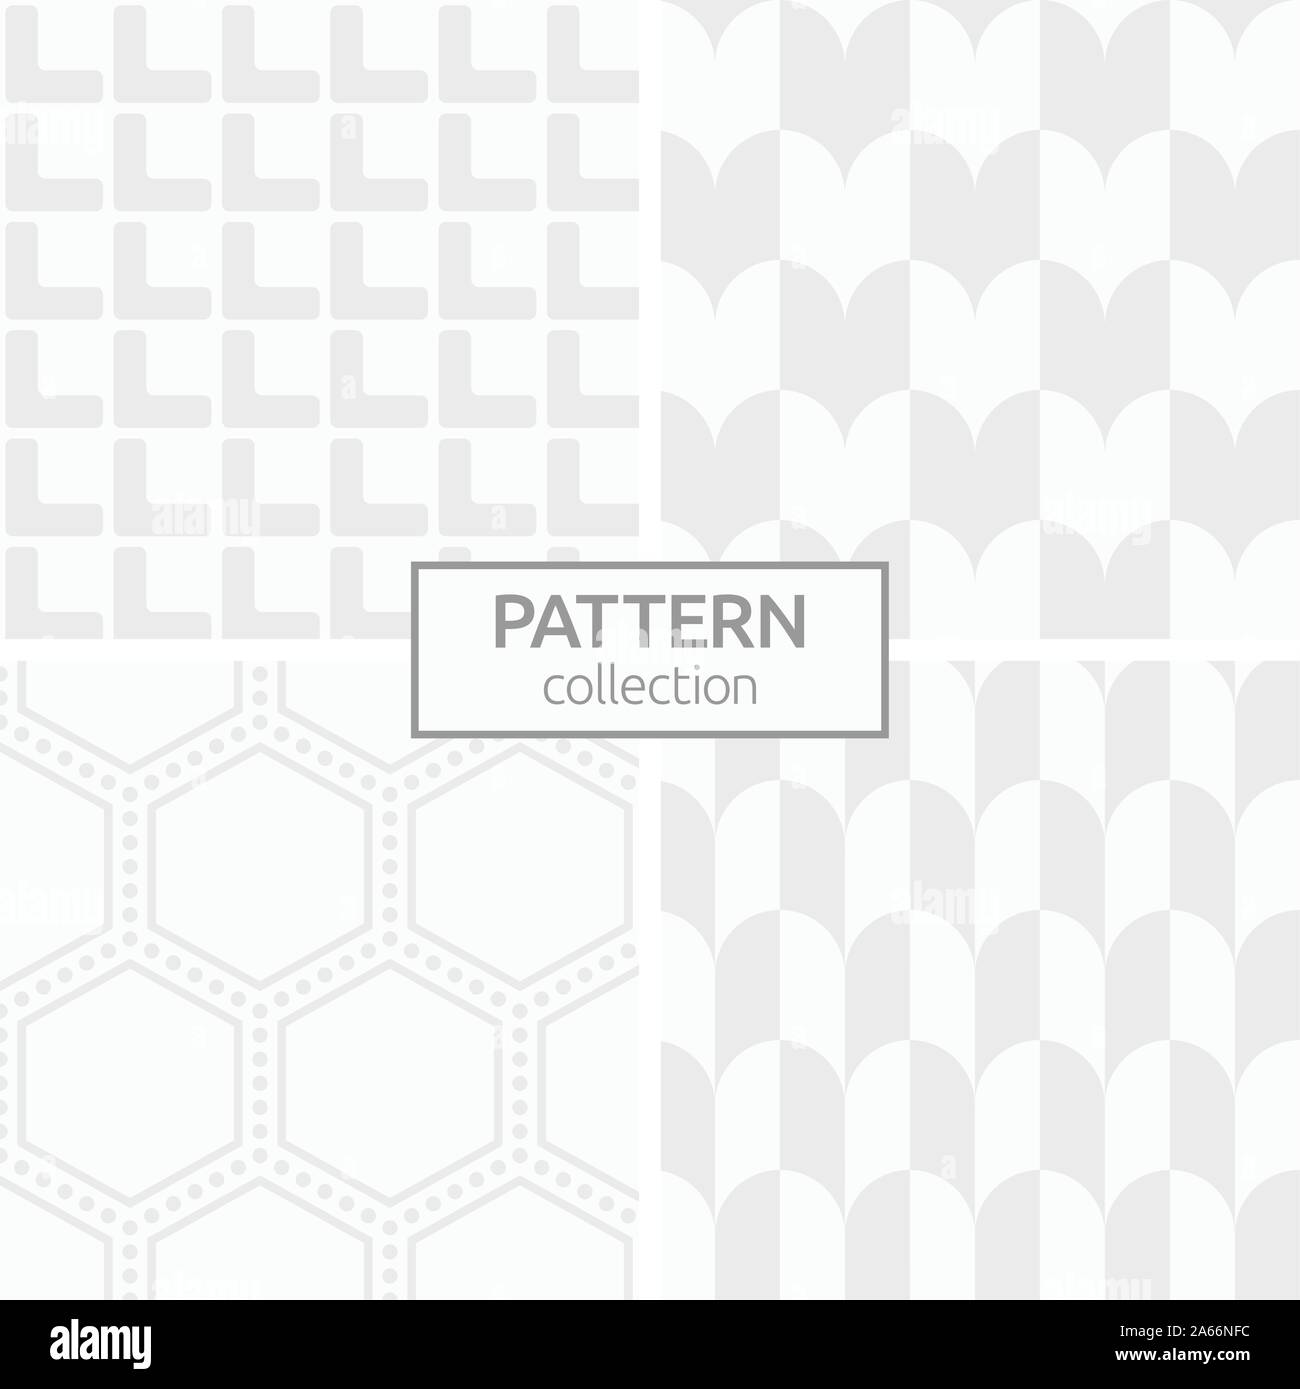 Download Modern Dots Pattern Background for free